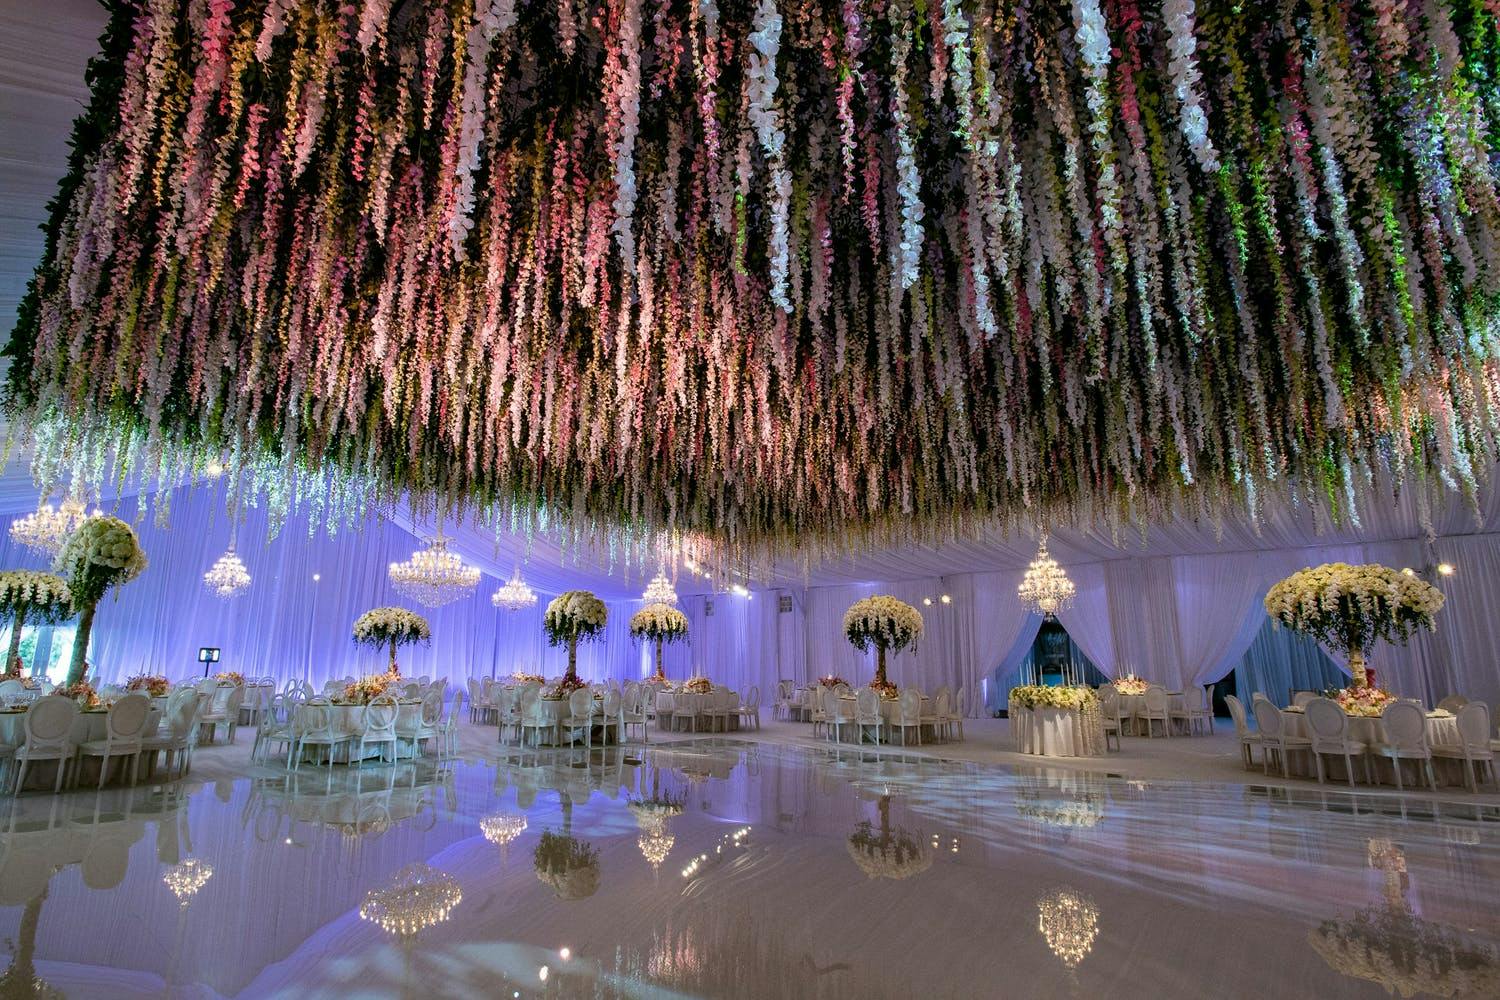 Wedding Ballroom With Mirrored Dance Floor and Floral Fringe Wedding Ceiling Decorations | PartySlate